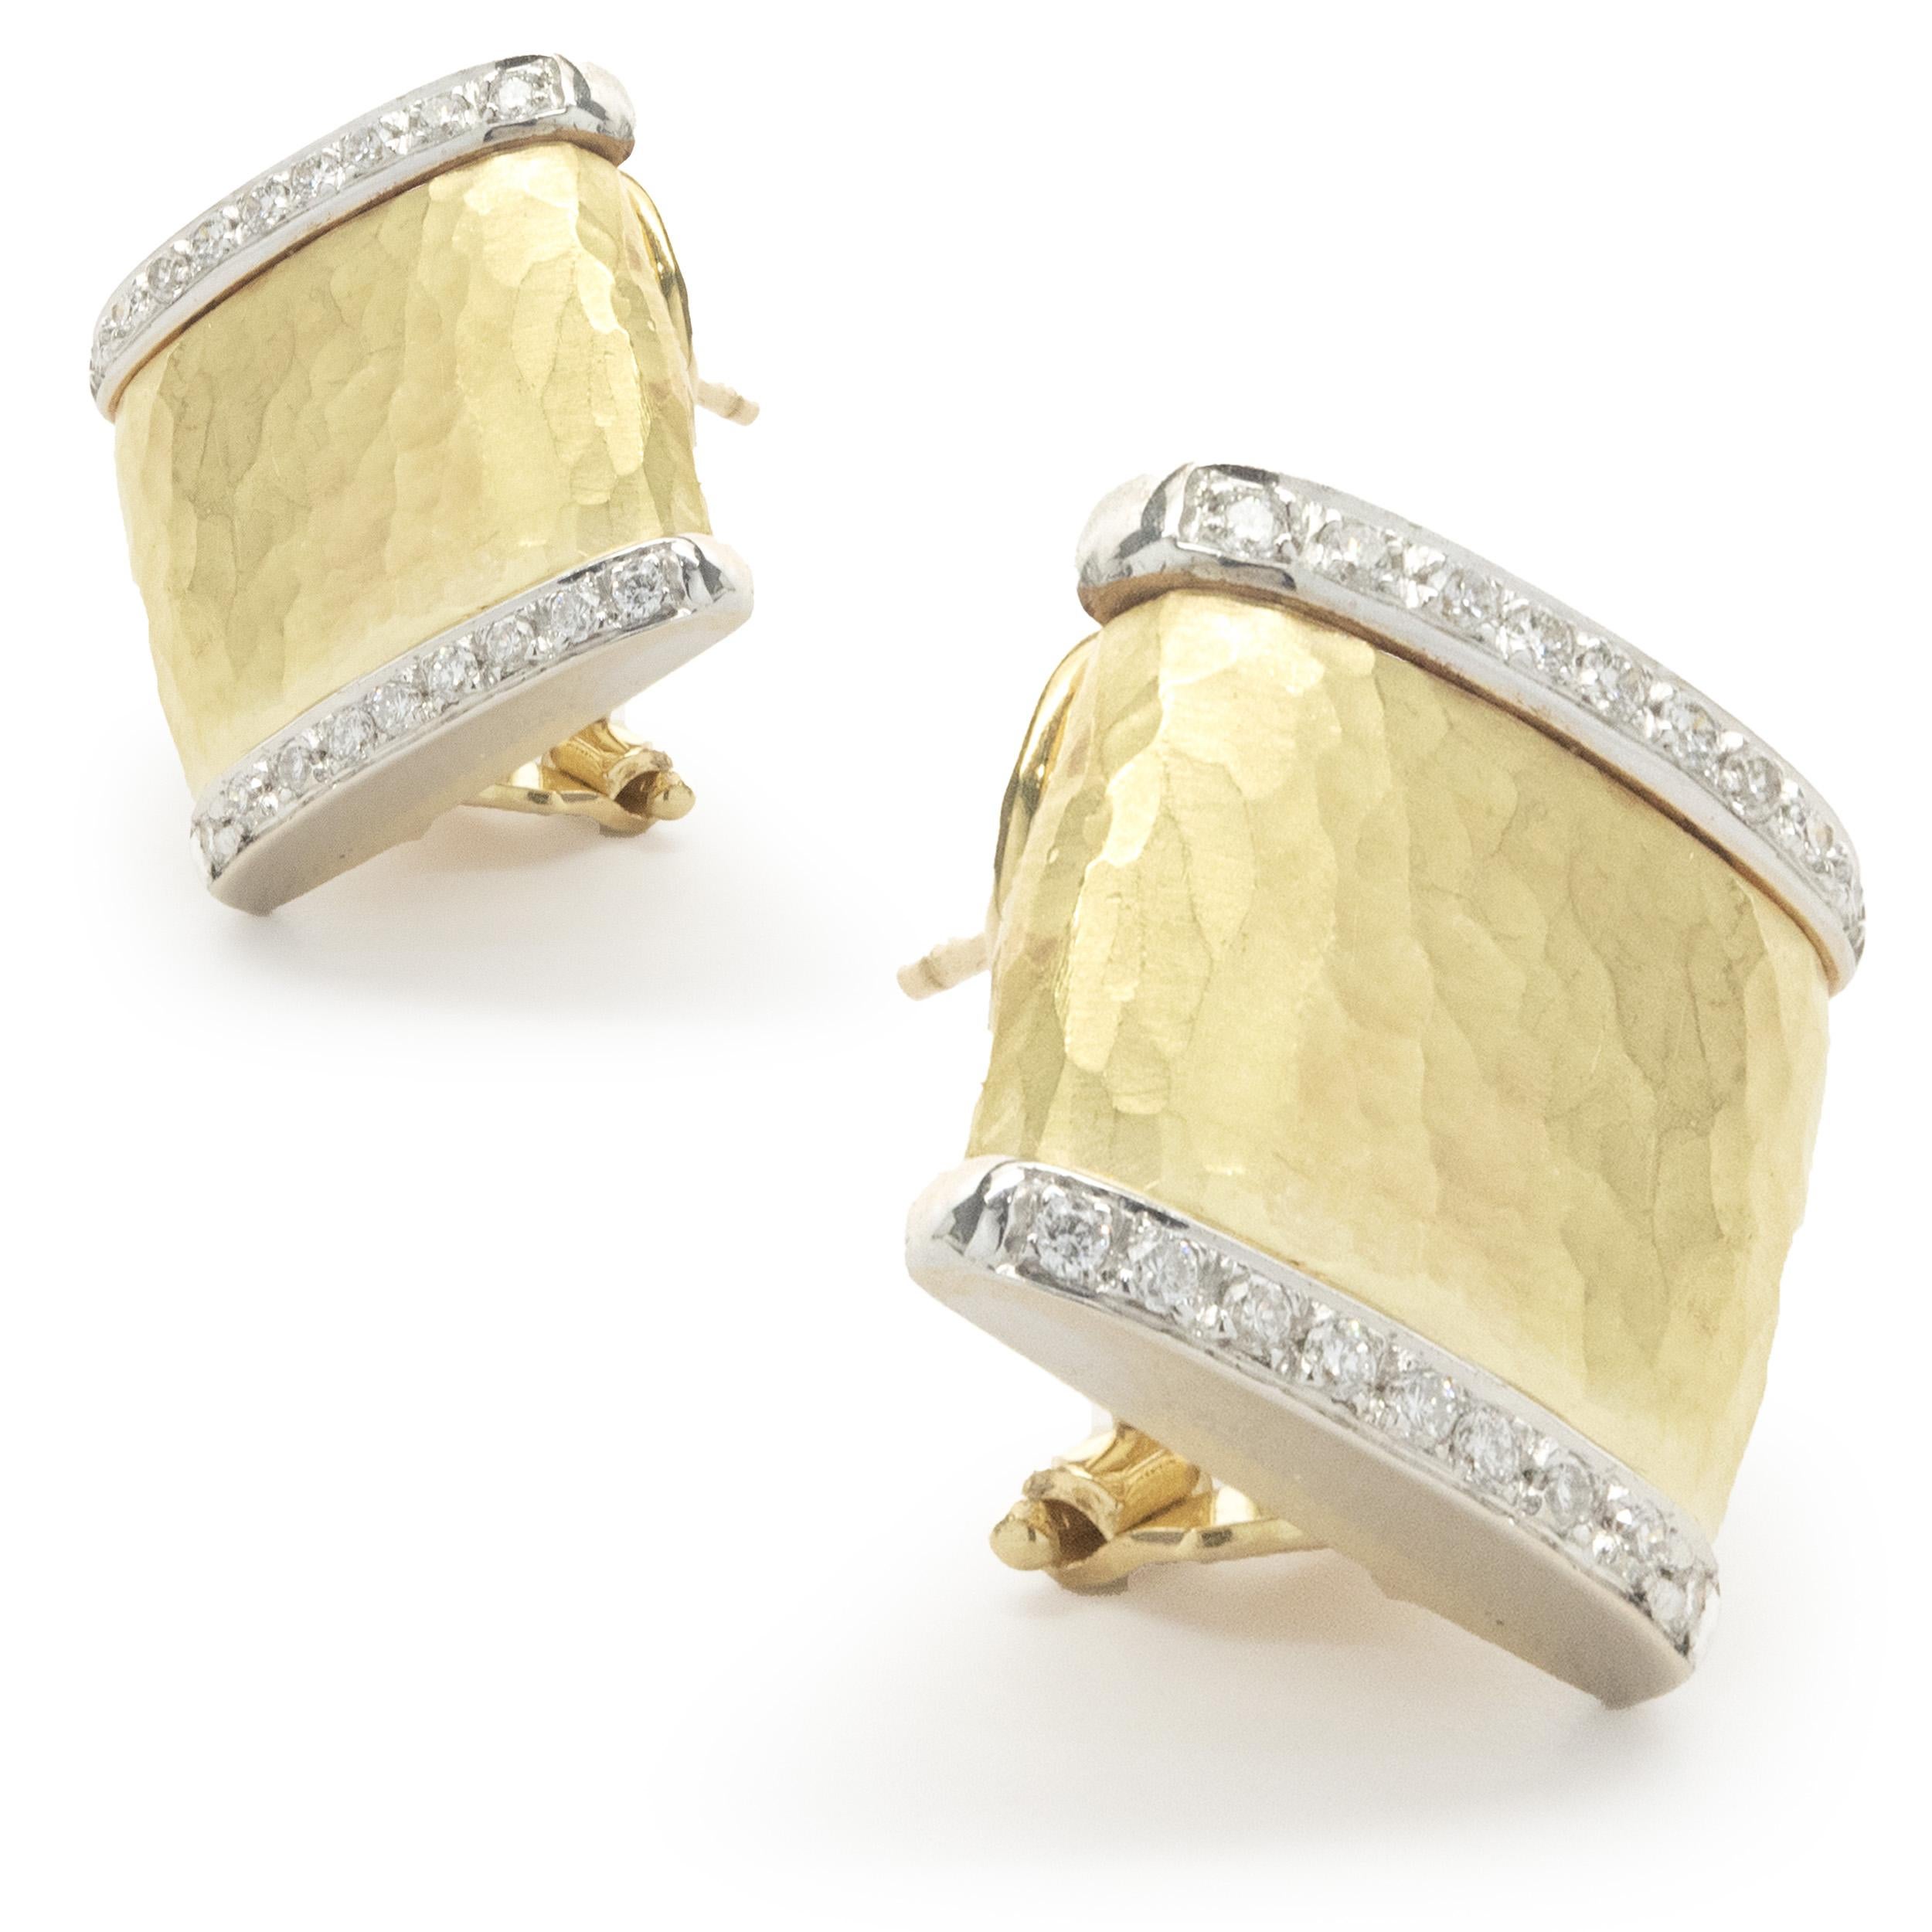 Designer: Vendorafa
Material: 18k yellow gold
Diamonds: 36 round brilliant cut =0.54cttw
Color: G
Clarity: VS
Dimensions: earrings are approximately 16.28mm by 16.09mm
Fastenings: omega backs
Weight: 16.46 grams